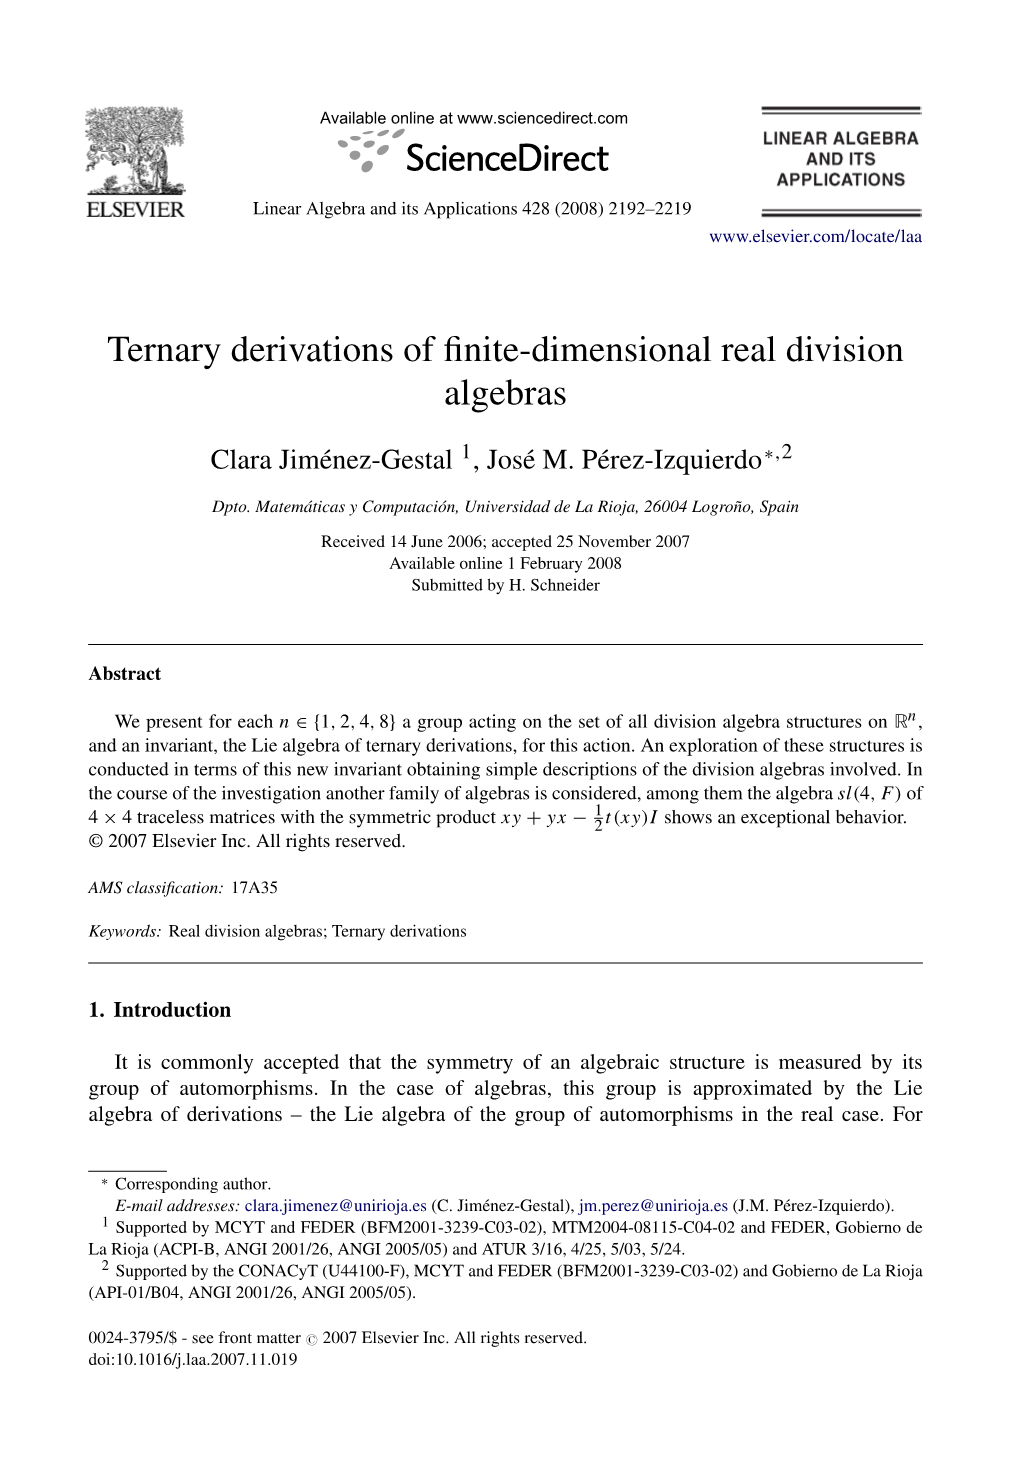 Ternary Derivations of Finite-Dimensional Real Division